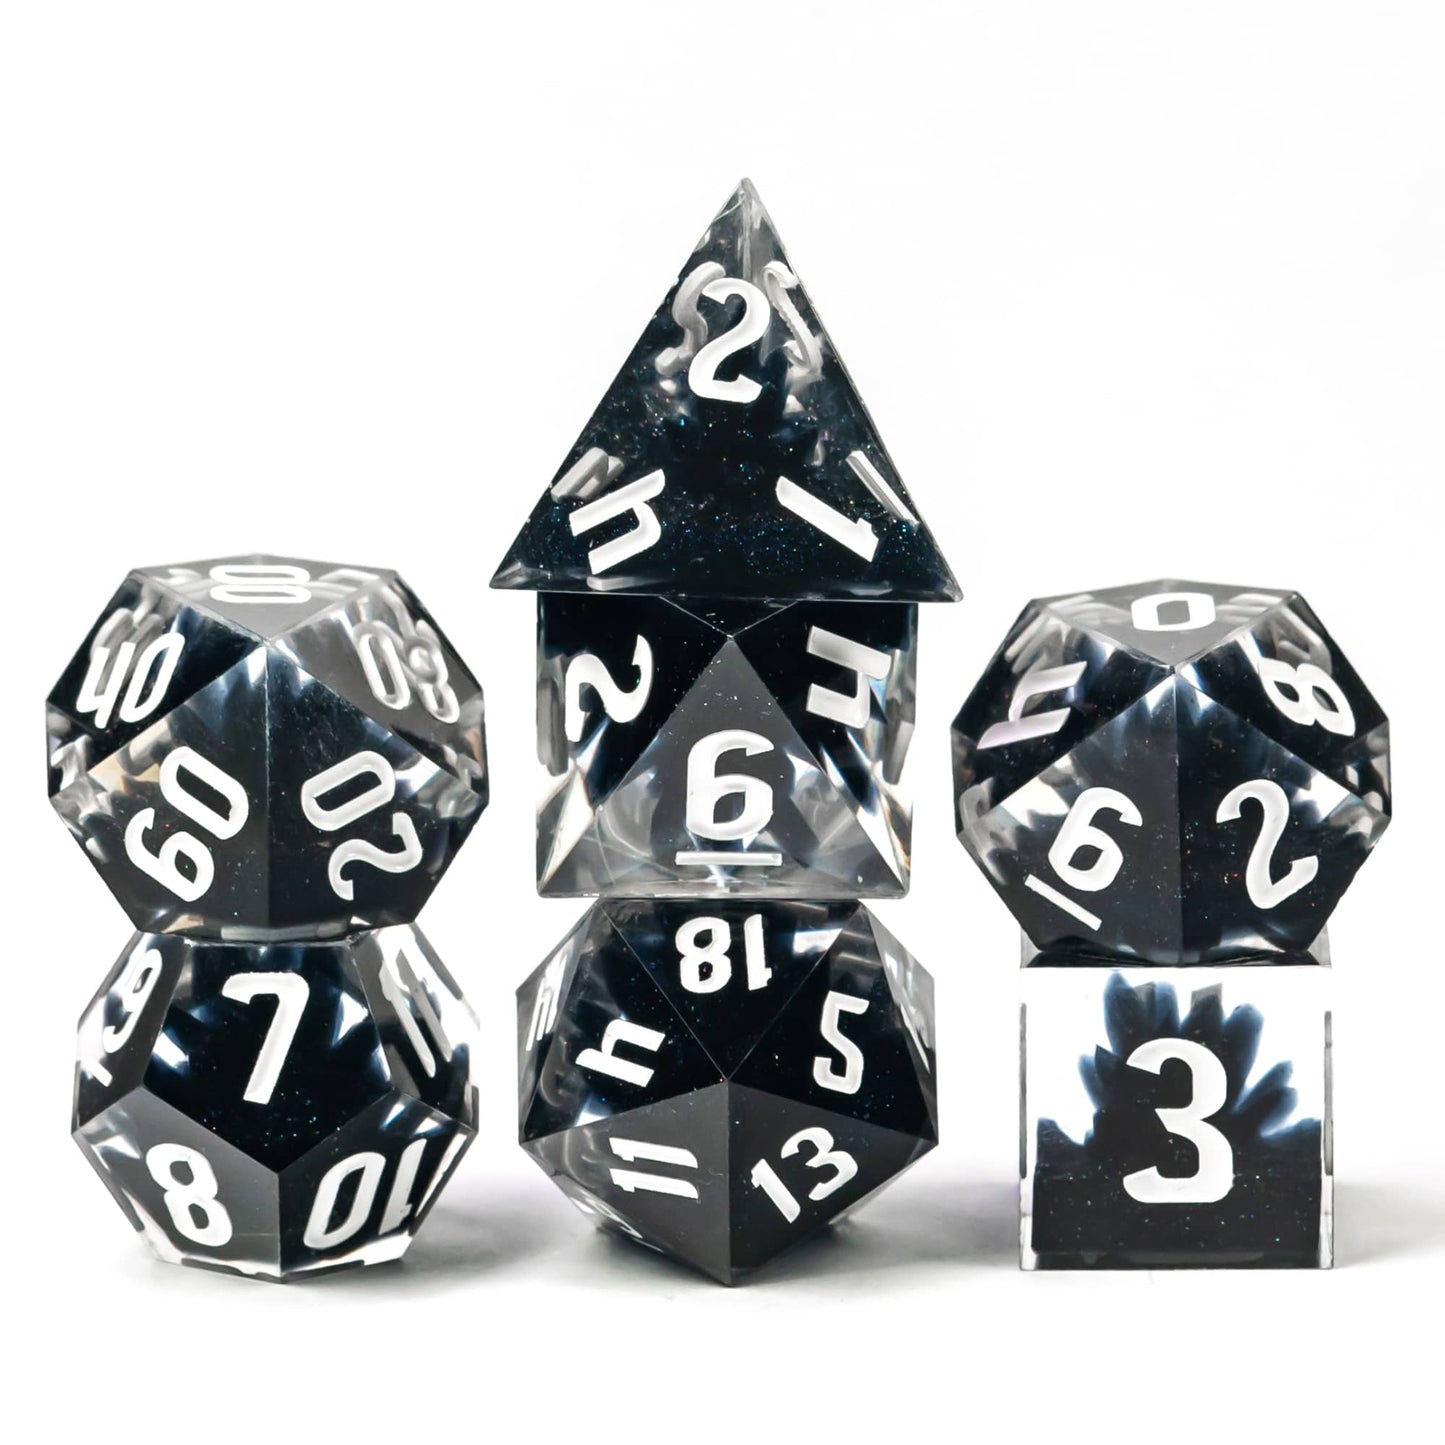 Stacked black crystal dnd dice set